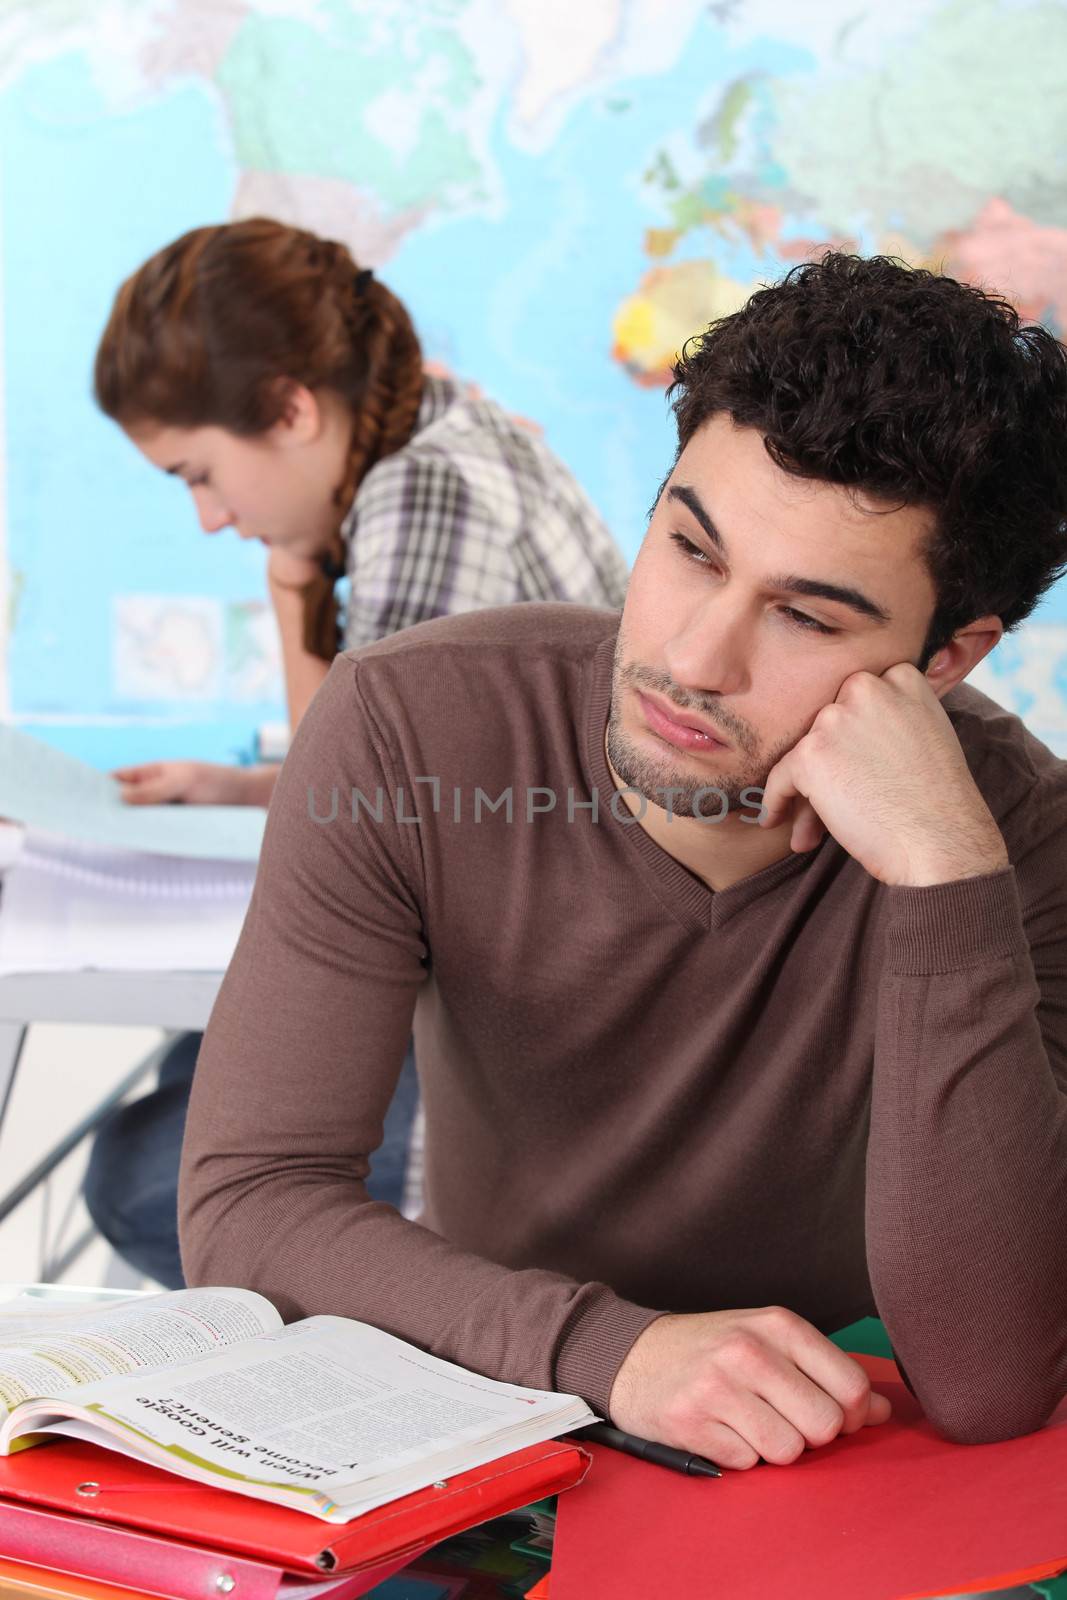 student looking tired and bored by phovoir